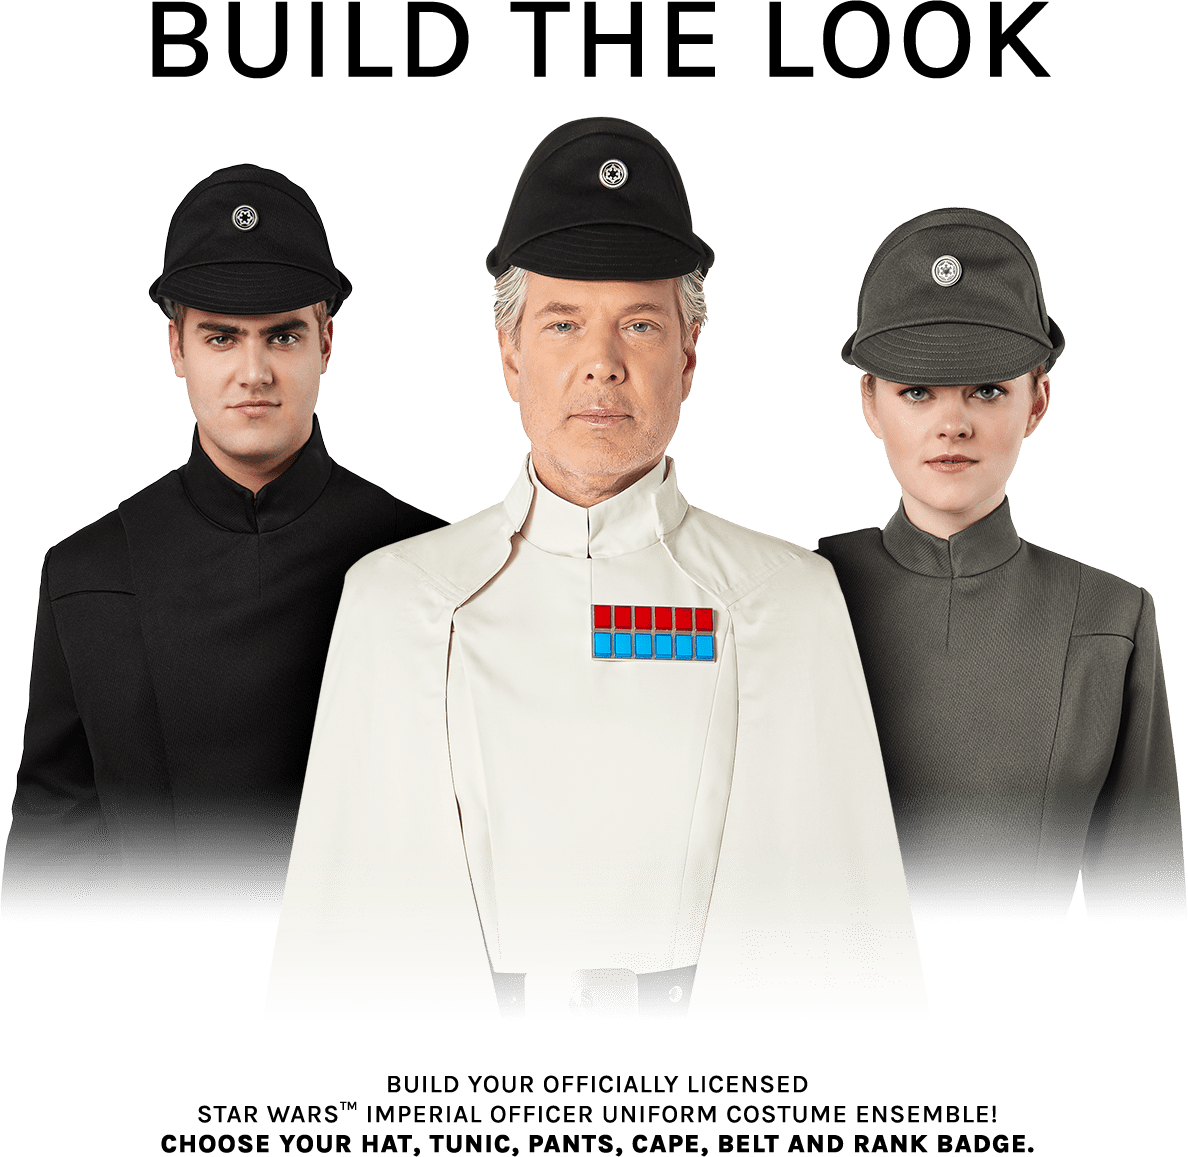 Go to build the look collection